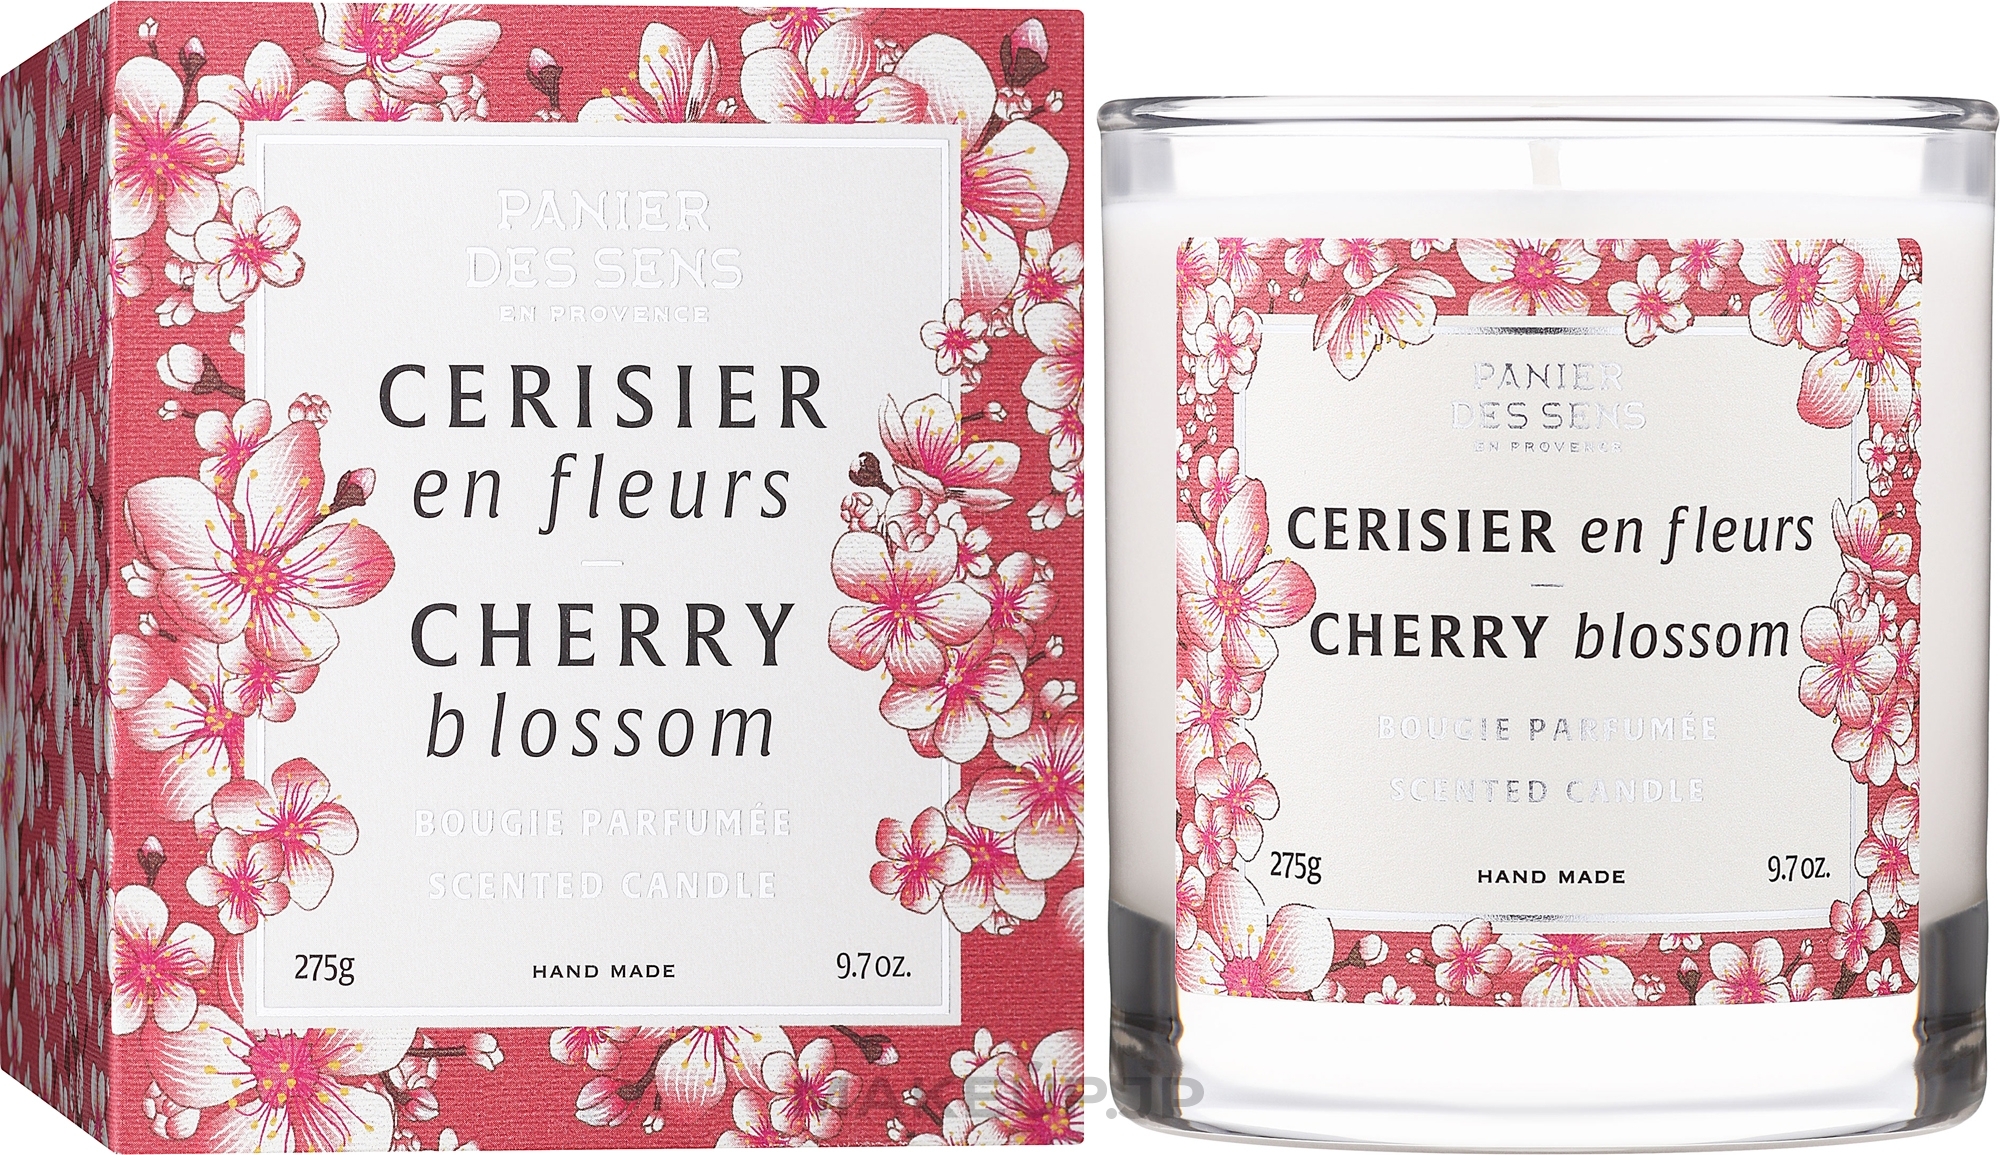 Scented Candle in Glass "Cherry Blossom" - Panier Des Sens Scented Candle Cherry Blossom — photo 275 g